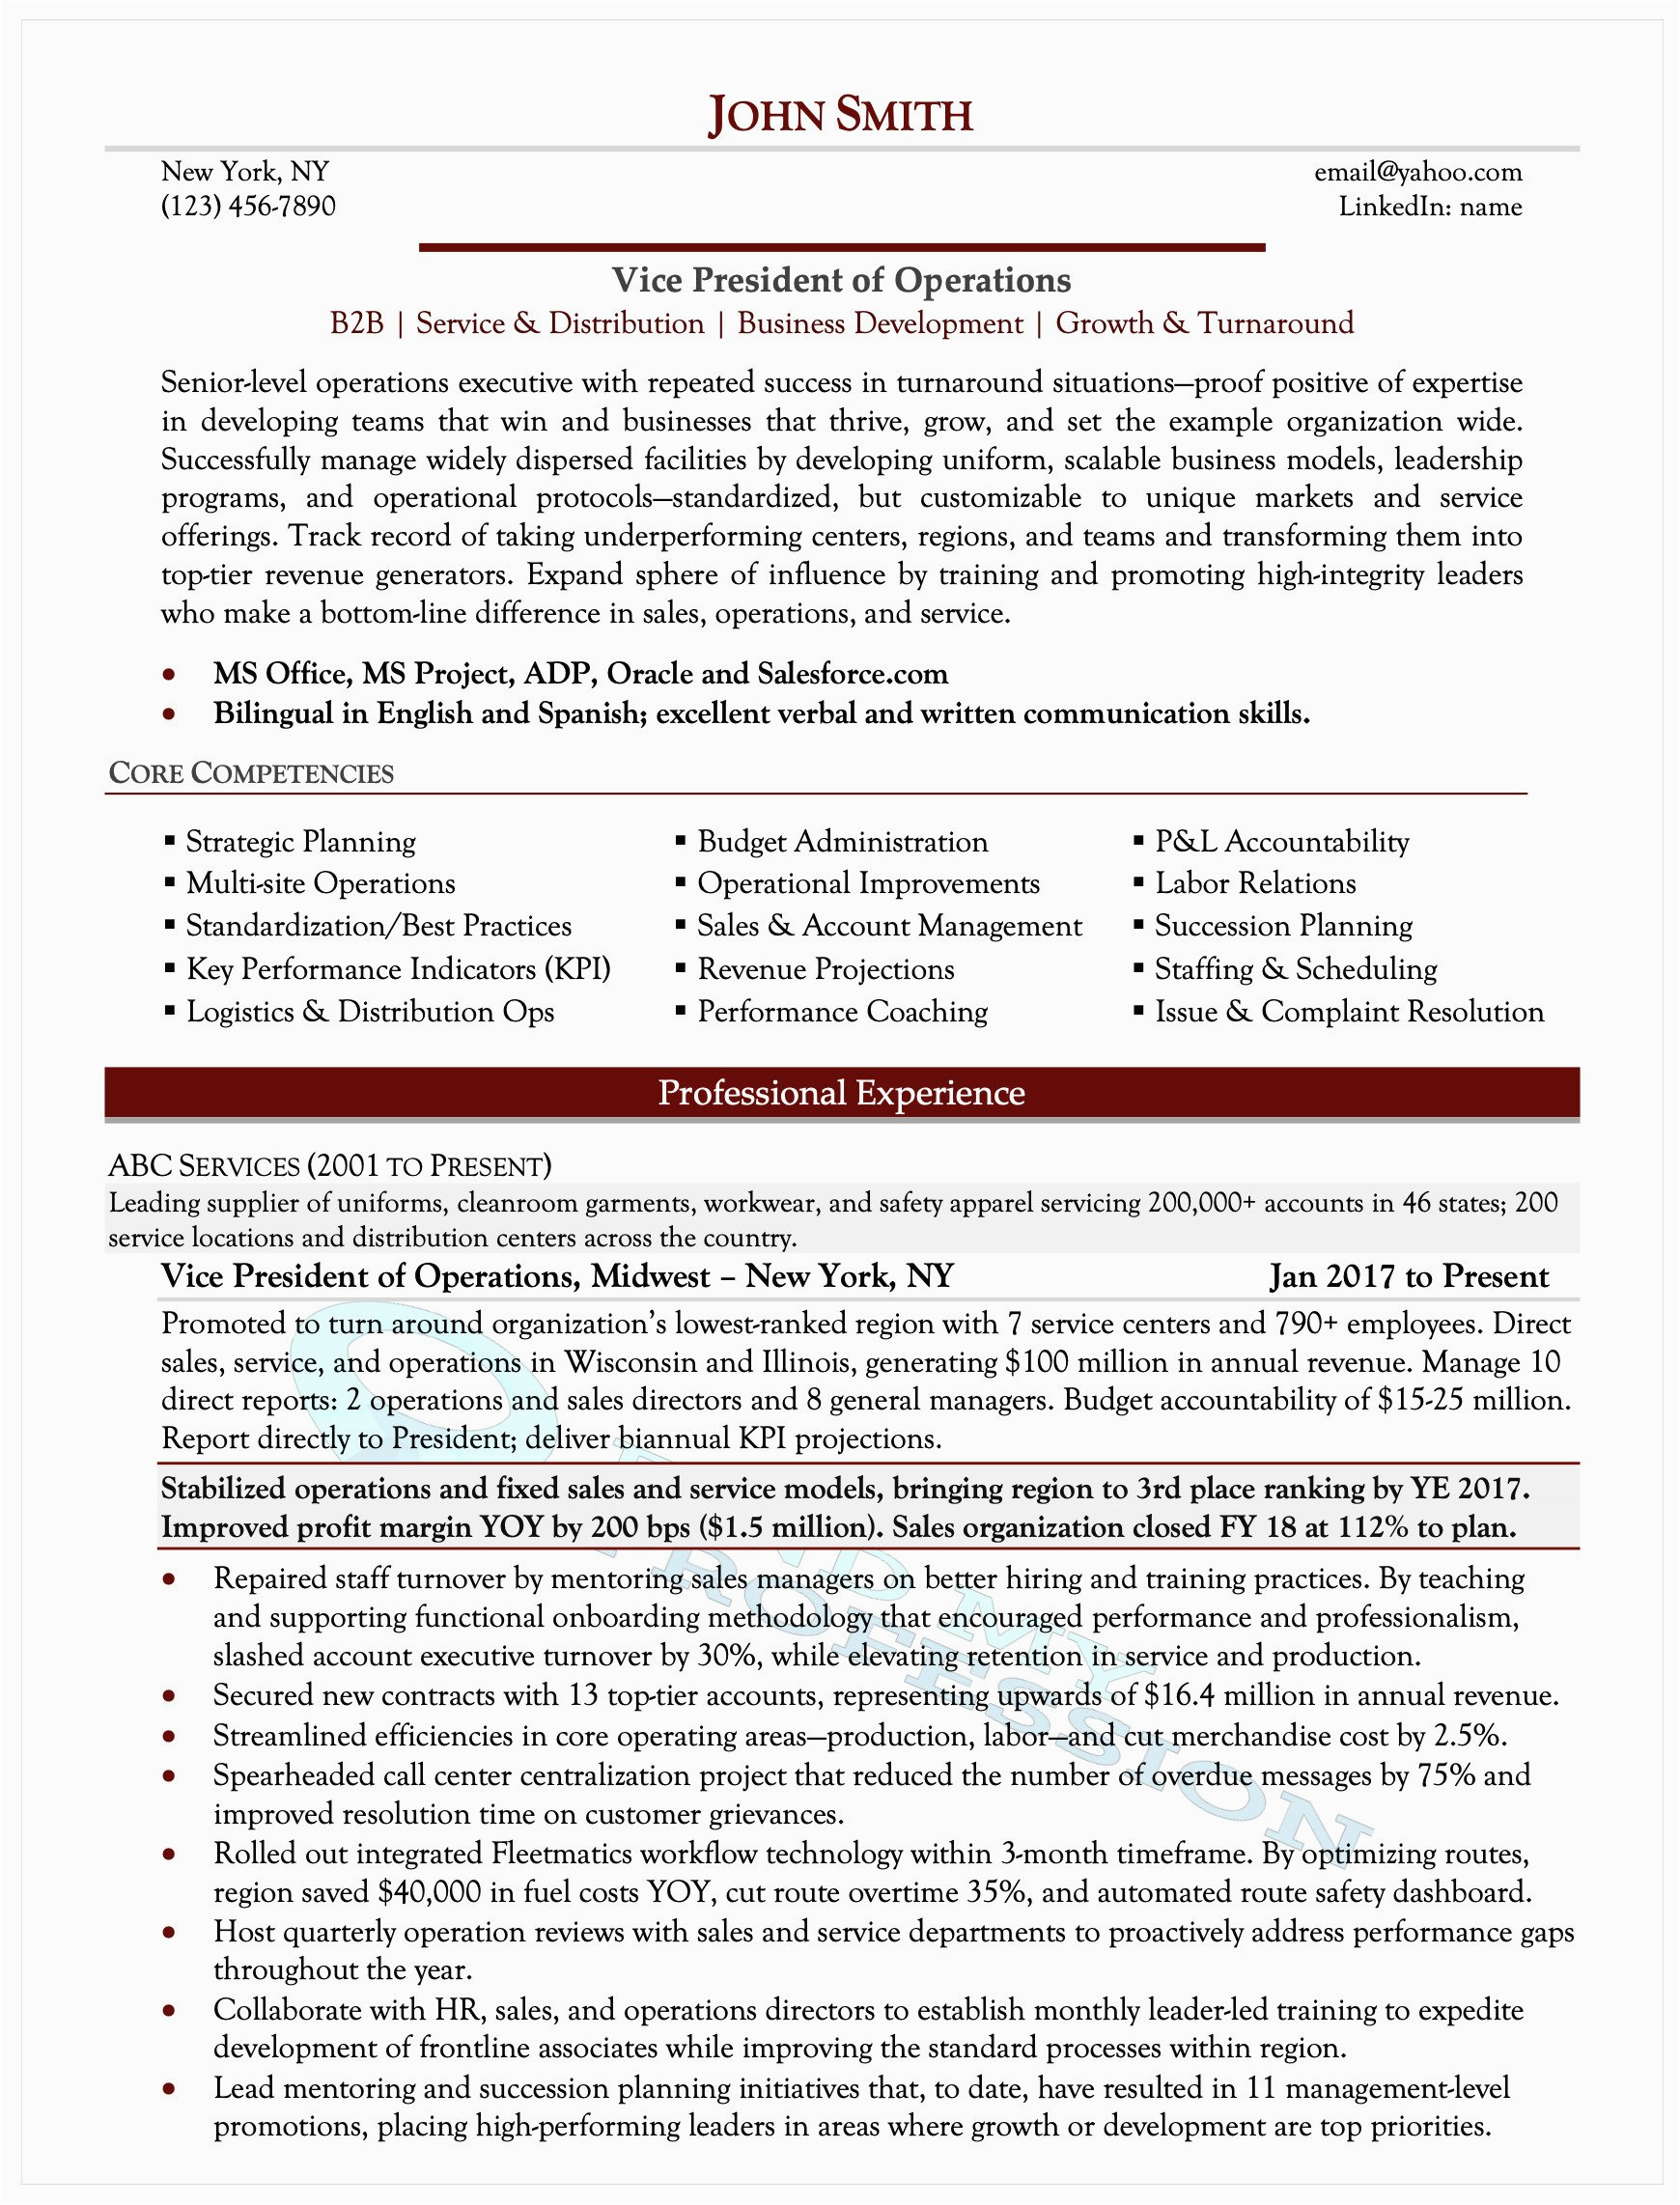 Samples Of Executive Summary for Resume How to Write An Elite Executive Resume 10 Simple Tips Wisestep